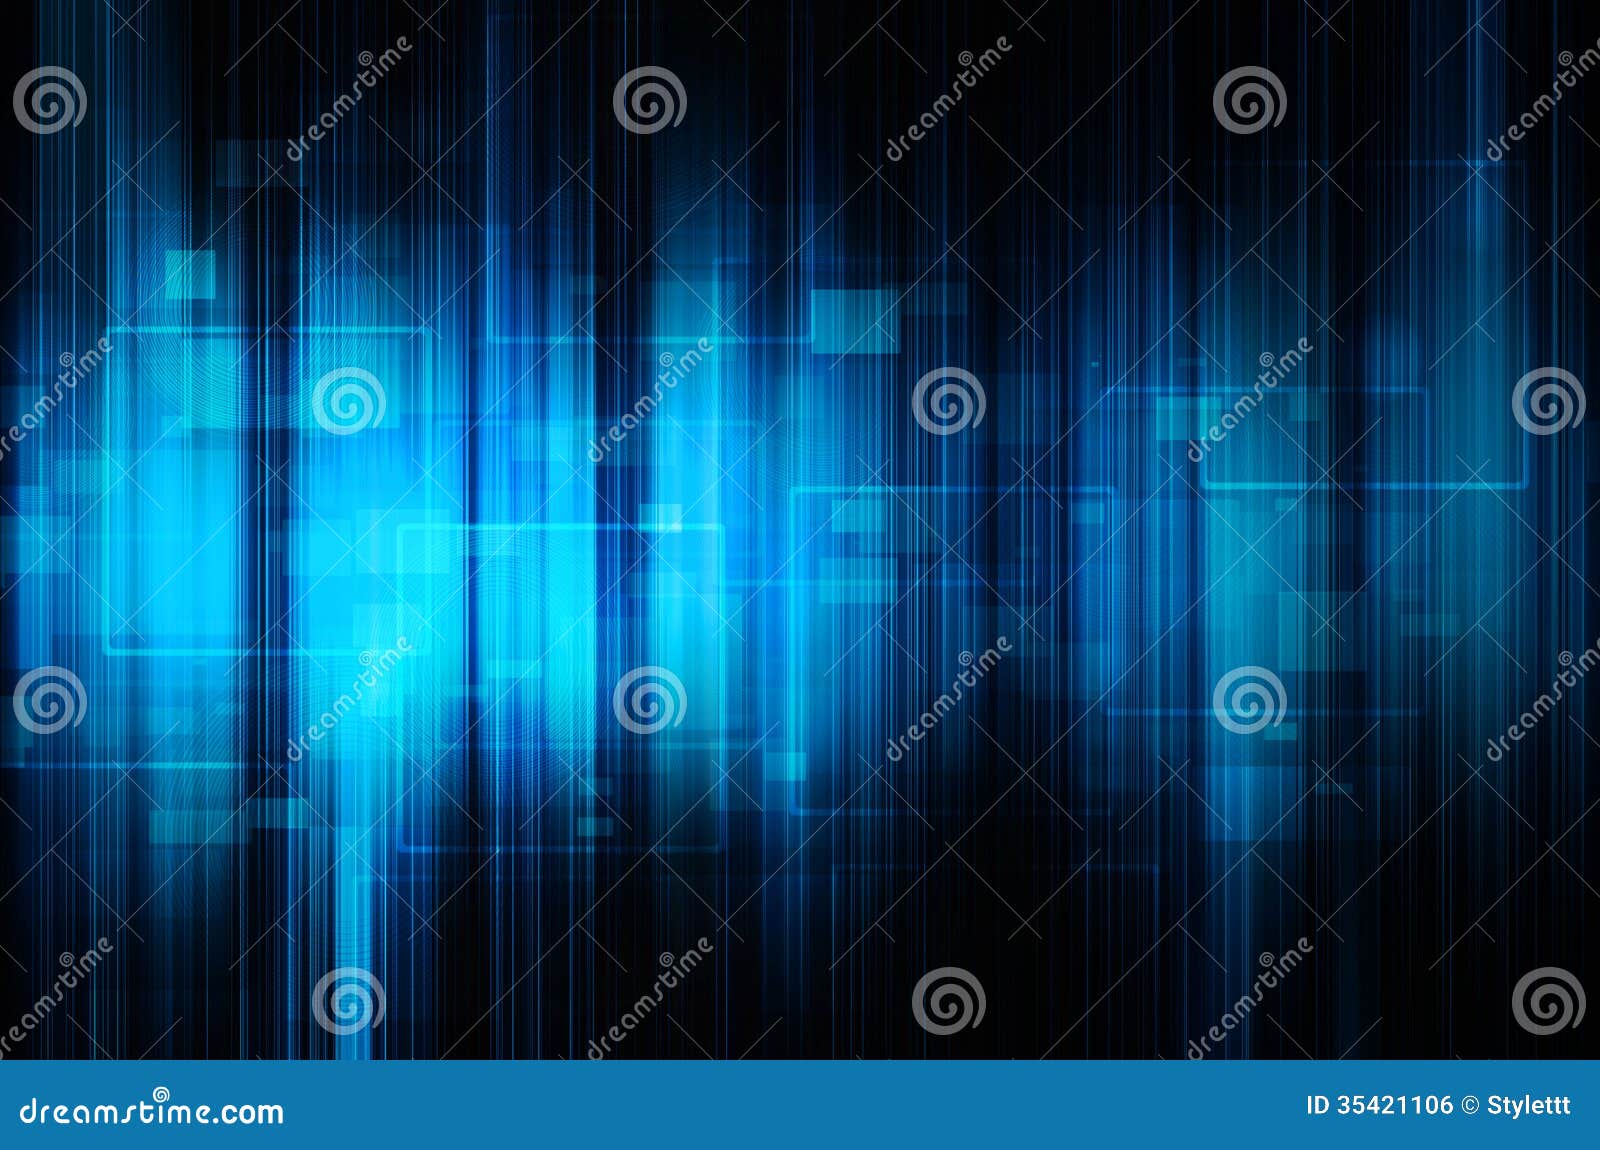 Abstract Blue Tech Background Stock Illustration Illustration of card 